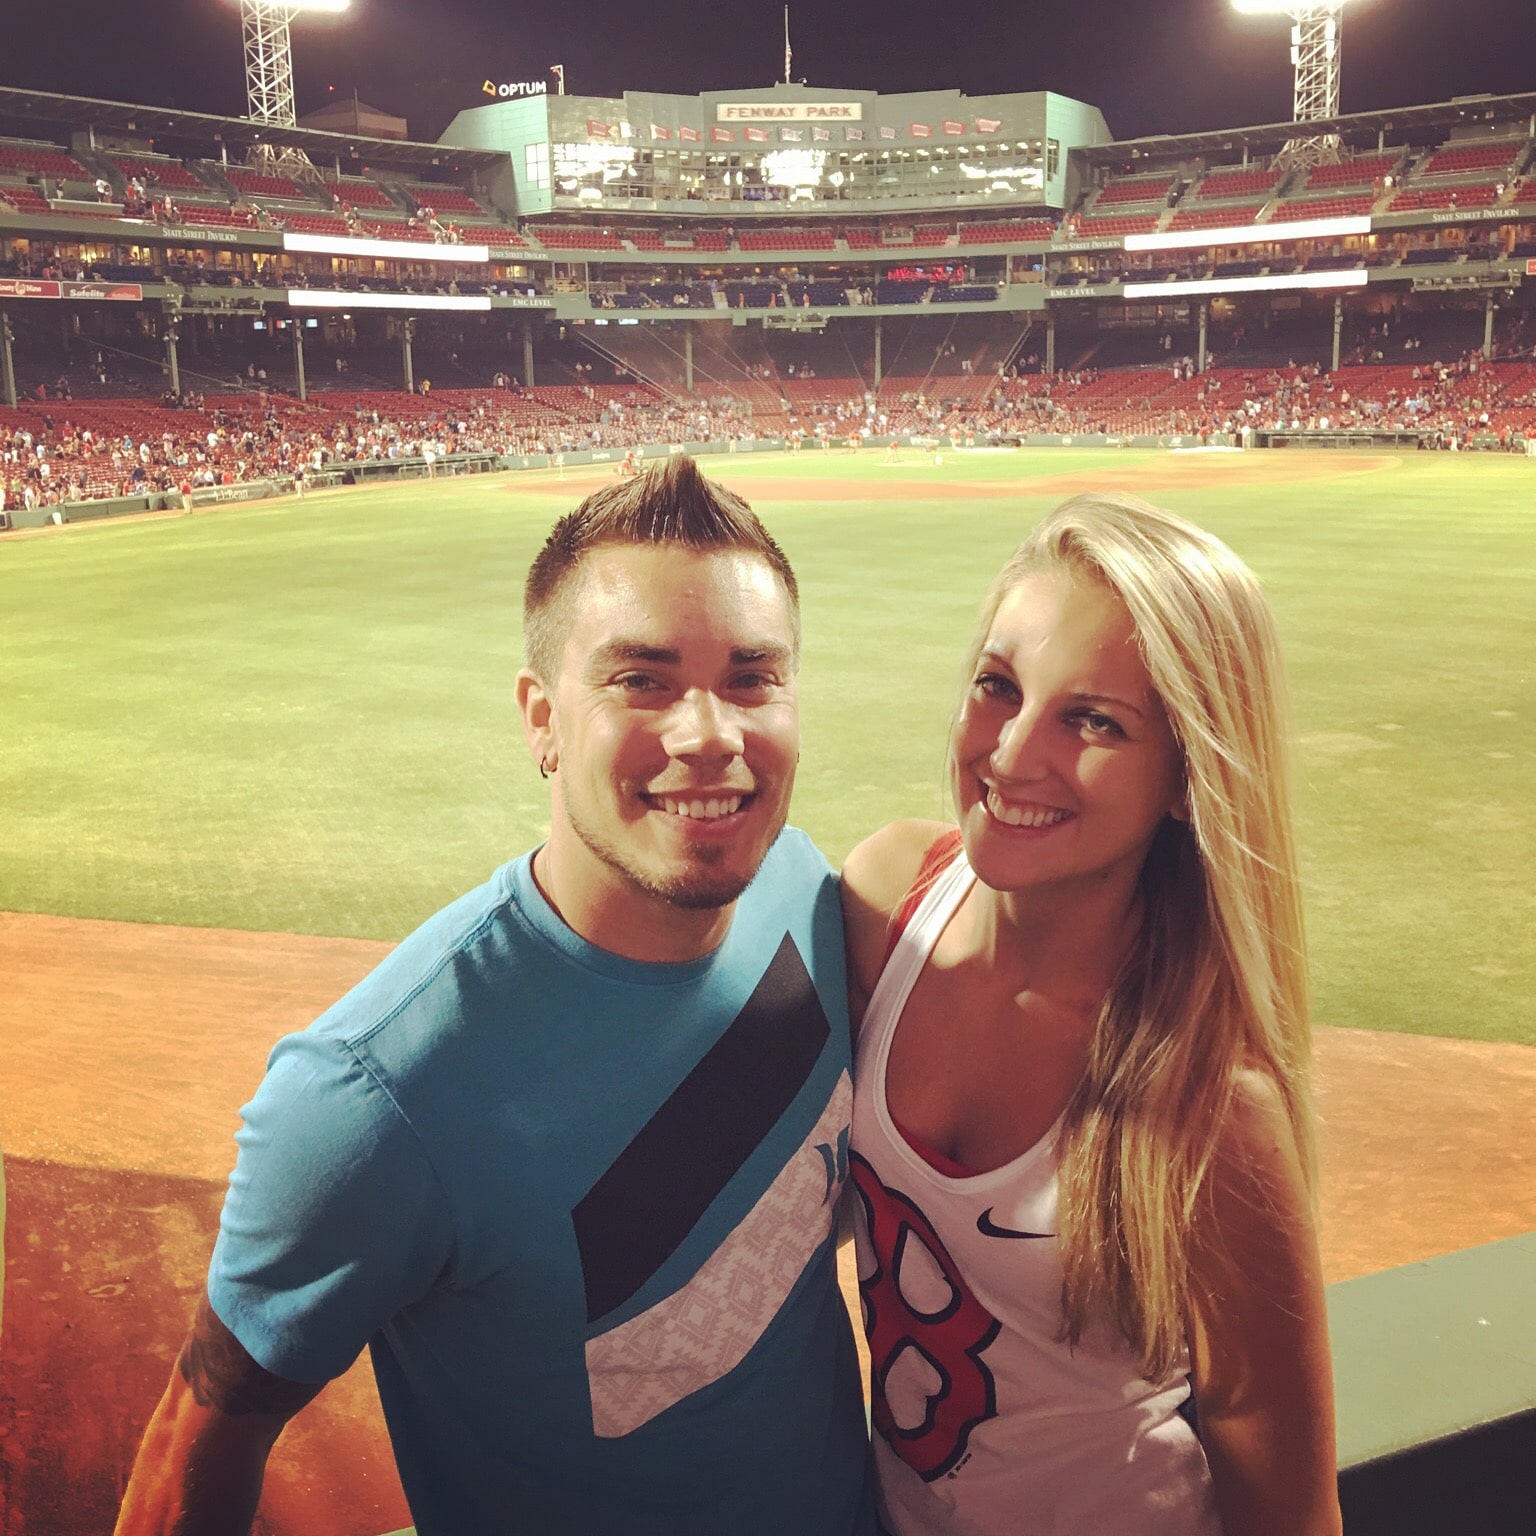 newly engaged couple smiling in front of a baseball field.